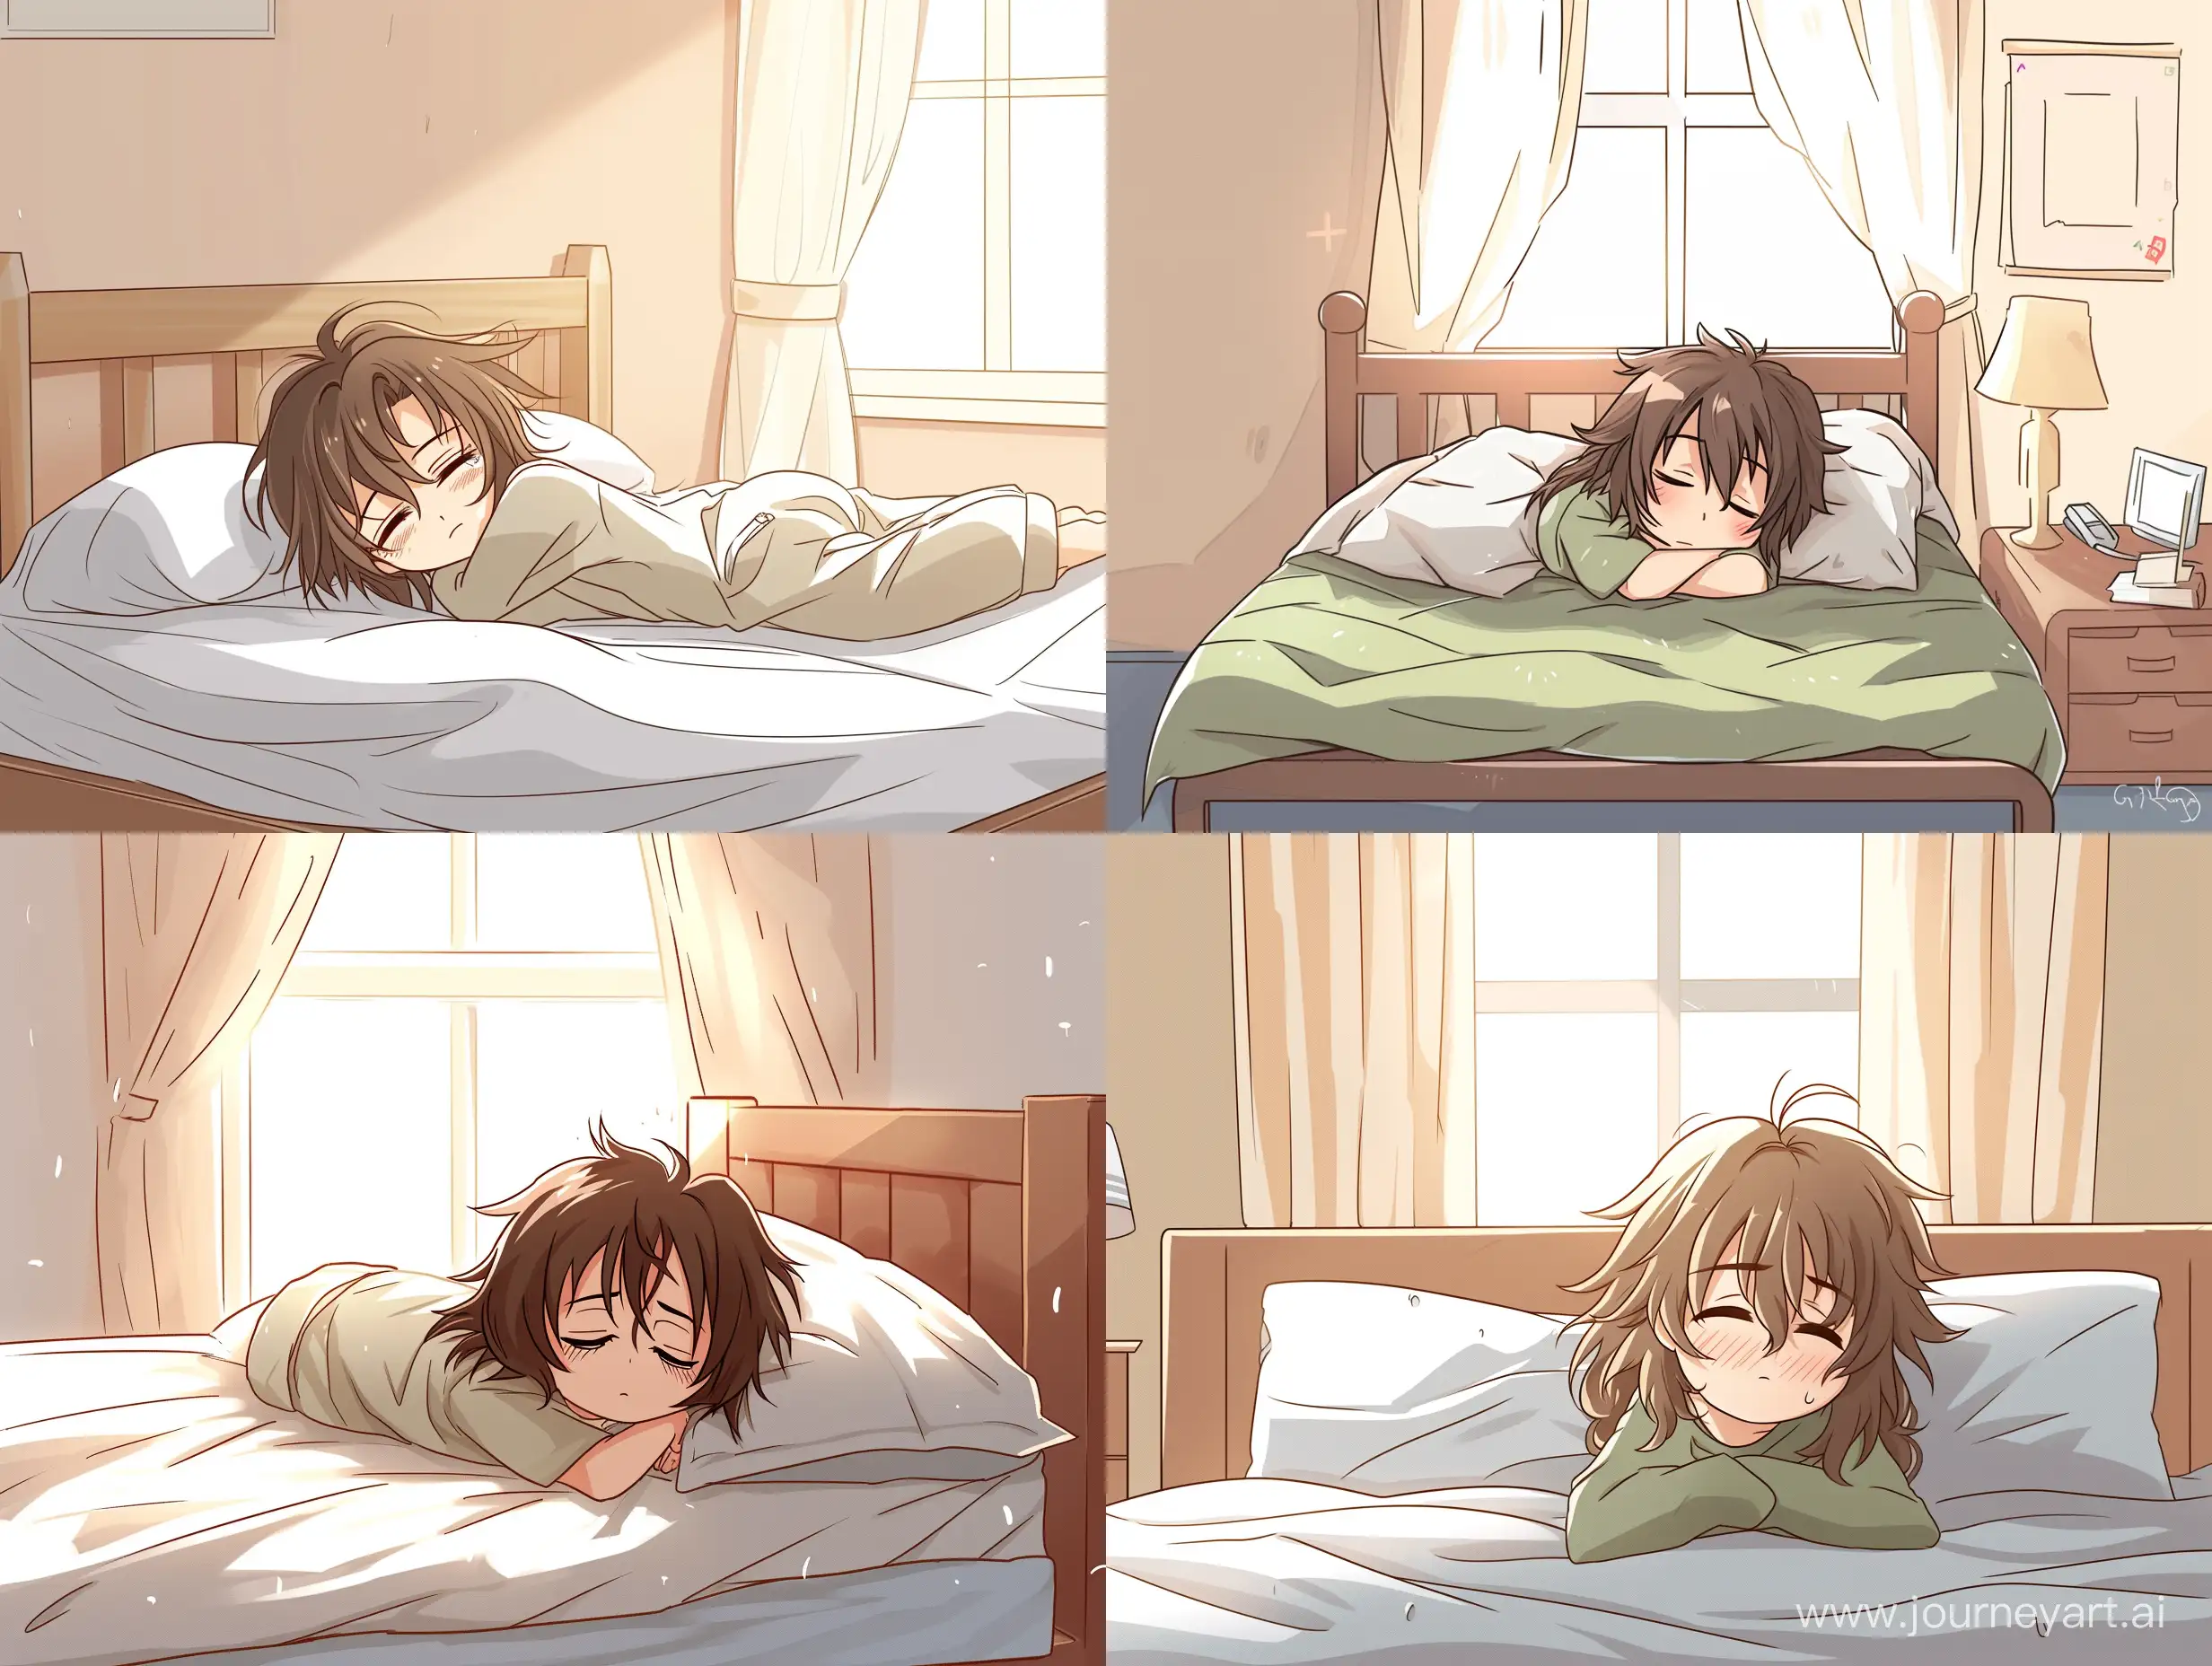 Anime-Boy-Sleeping-in-Simple-Room-with-Chibi-Style